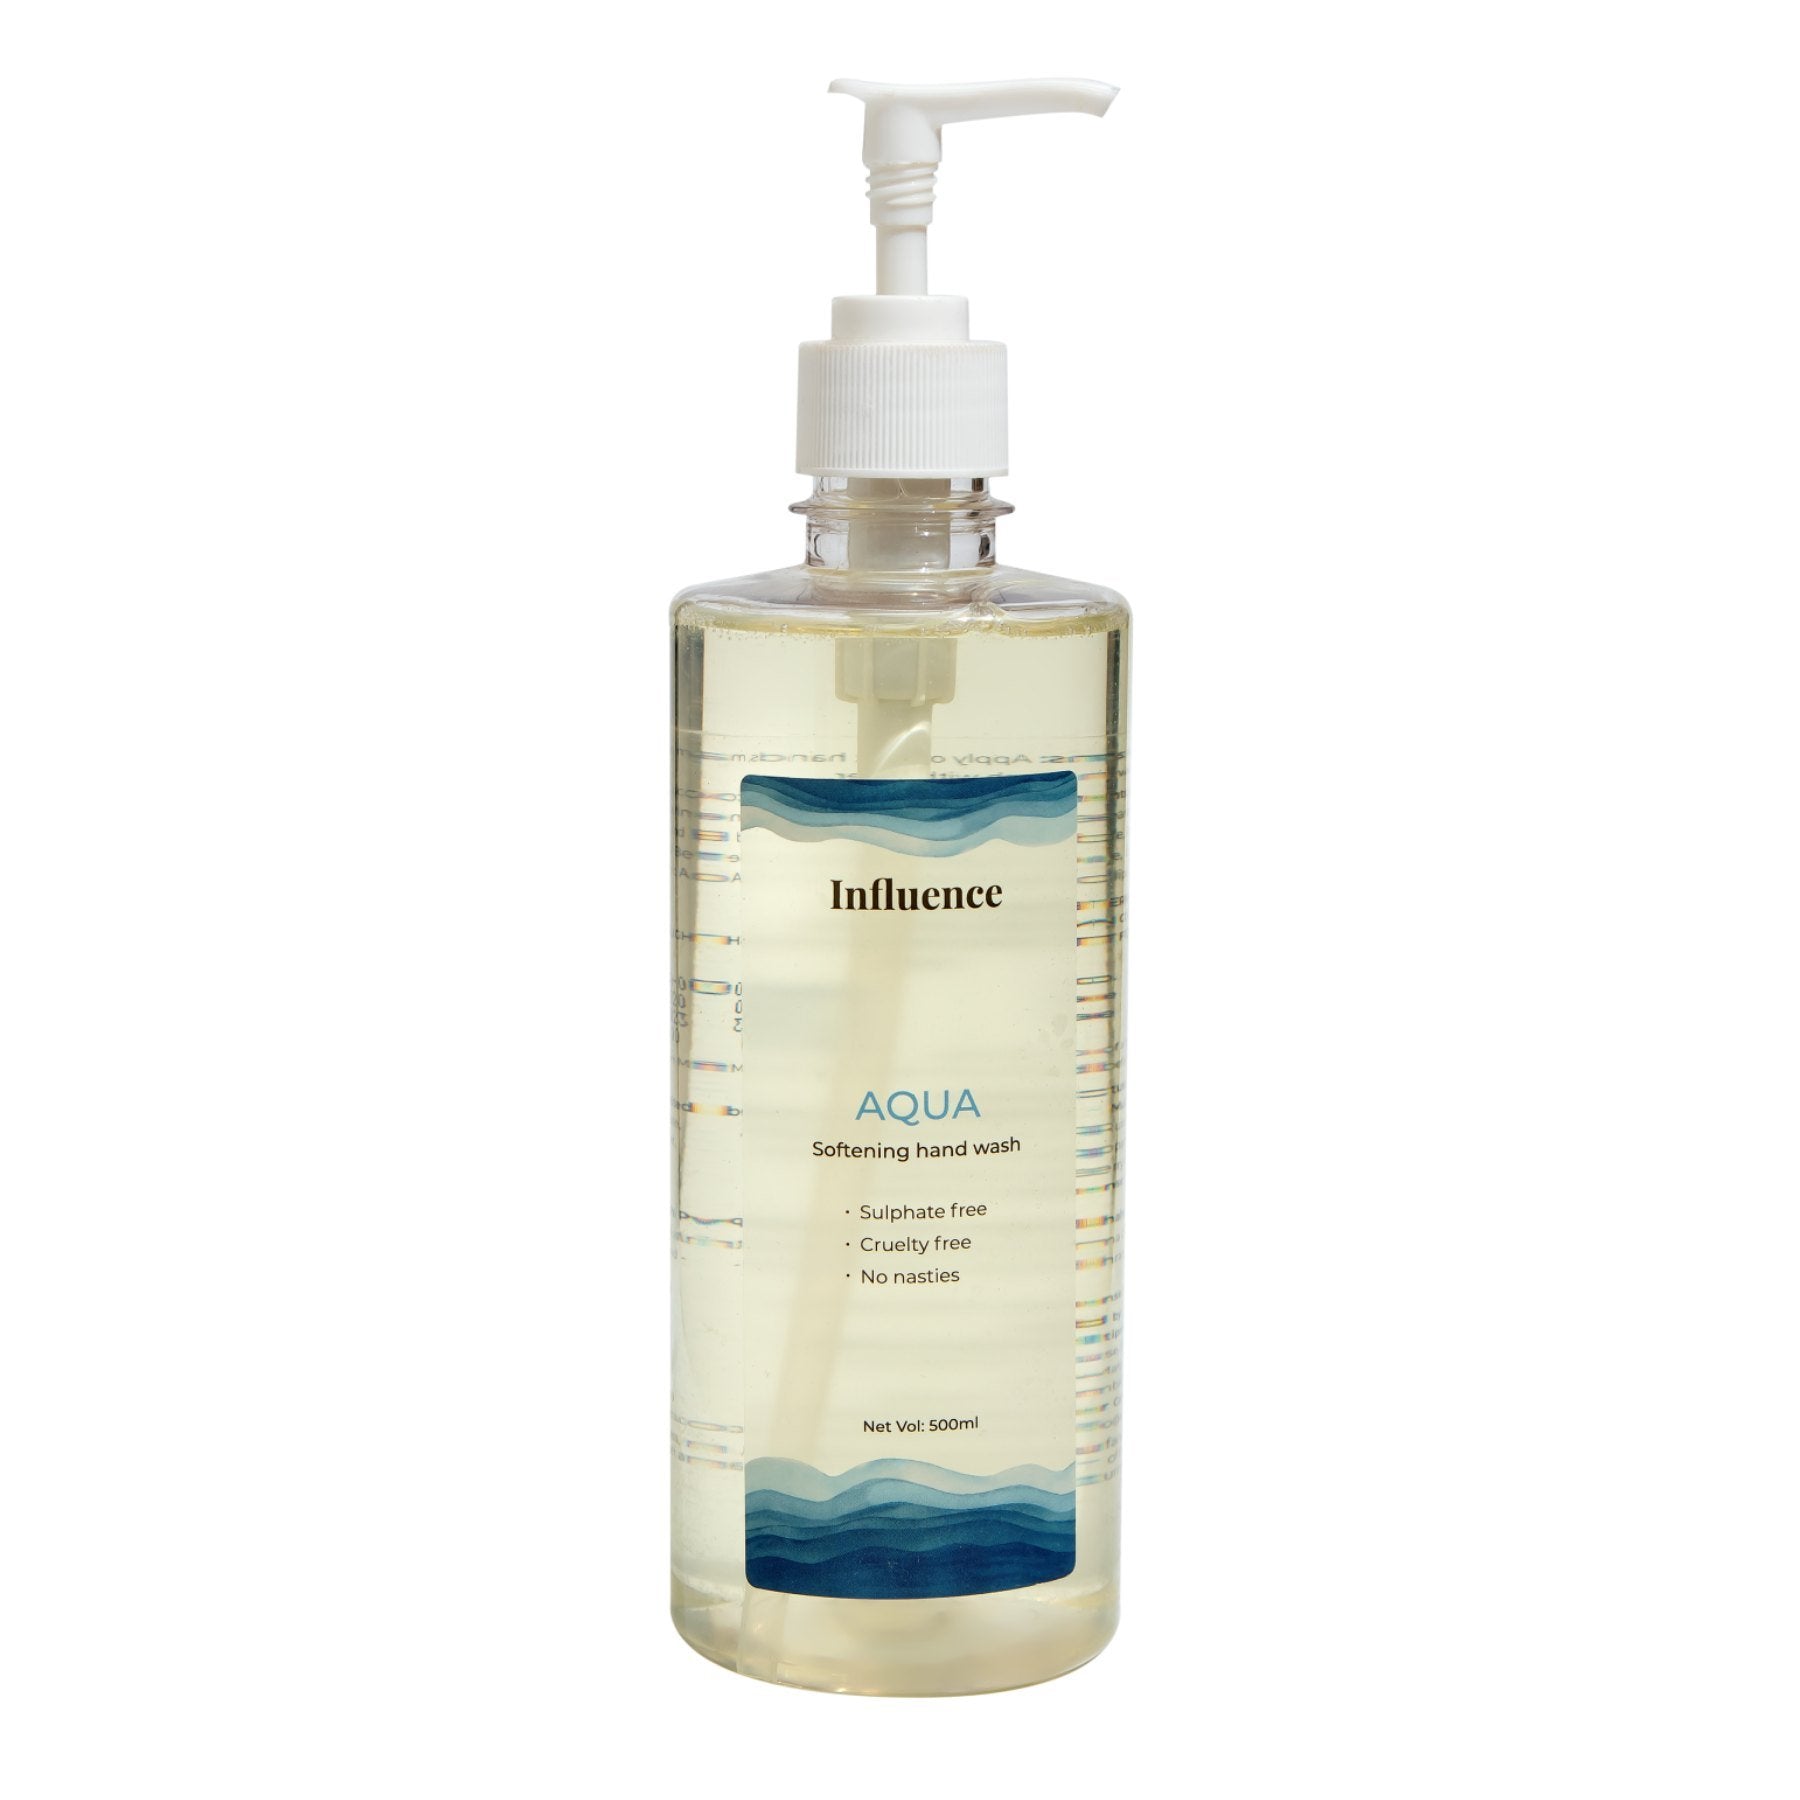 Shop Influence Aqua Hand Wash (500 ml) on Sublime Life. Kills Germs and Keeps your Hands Clean